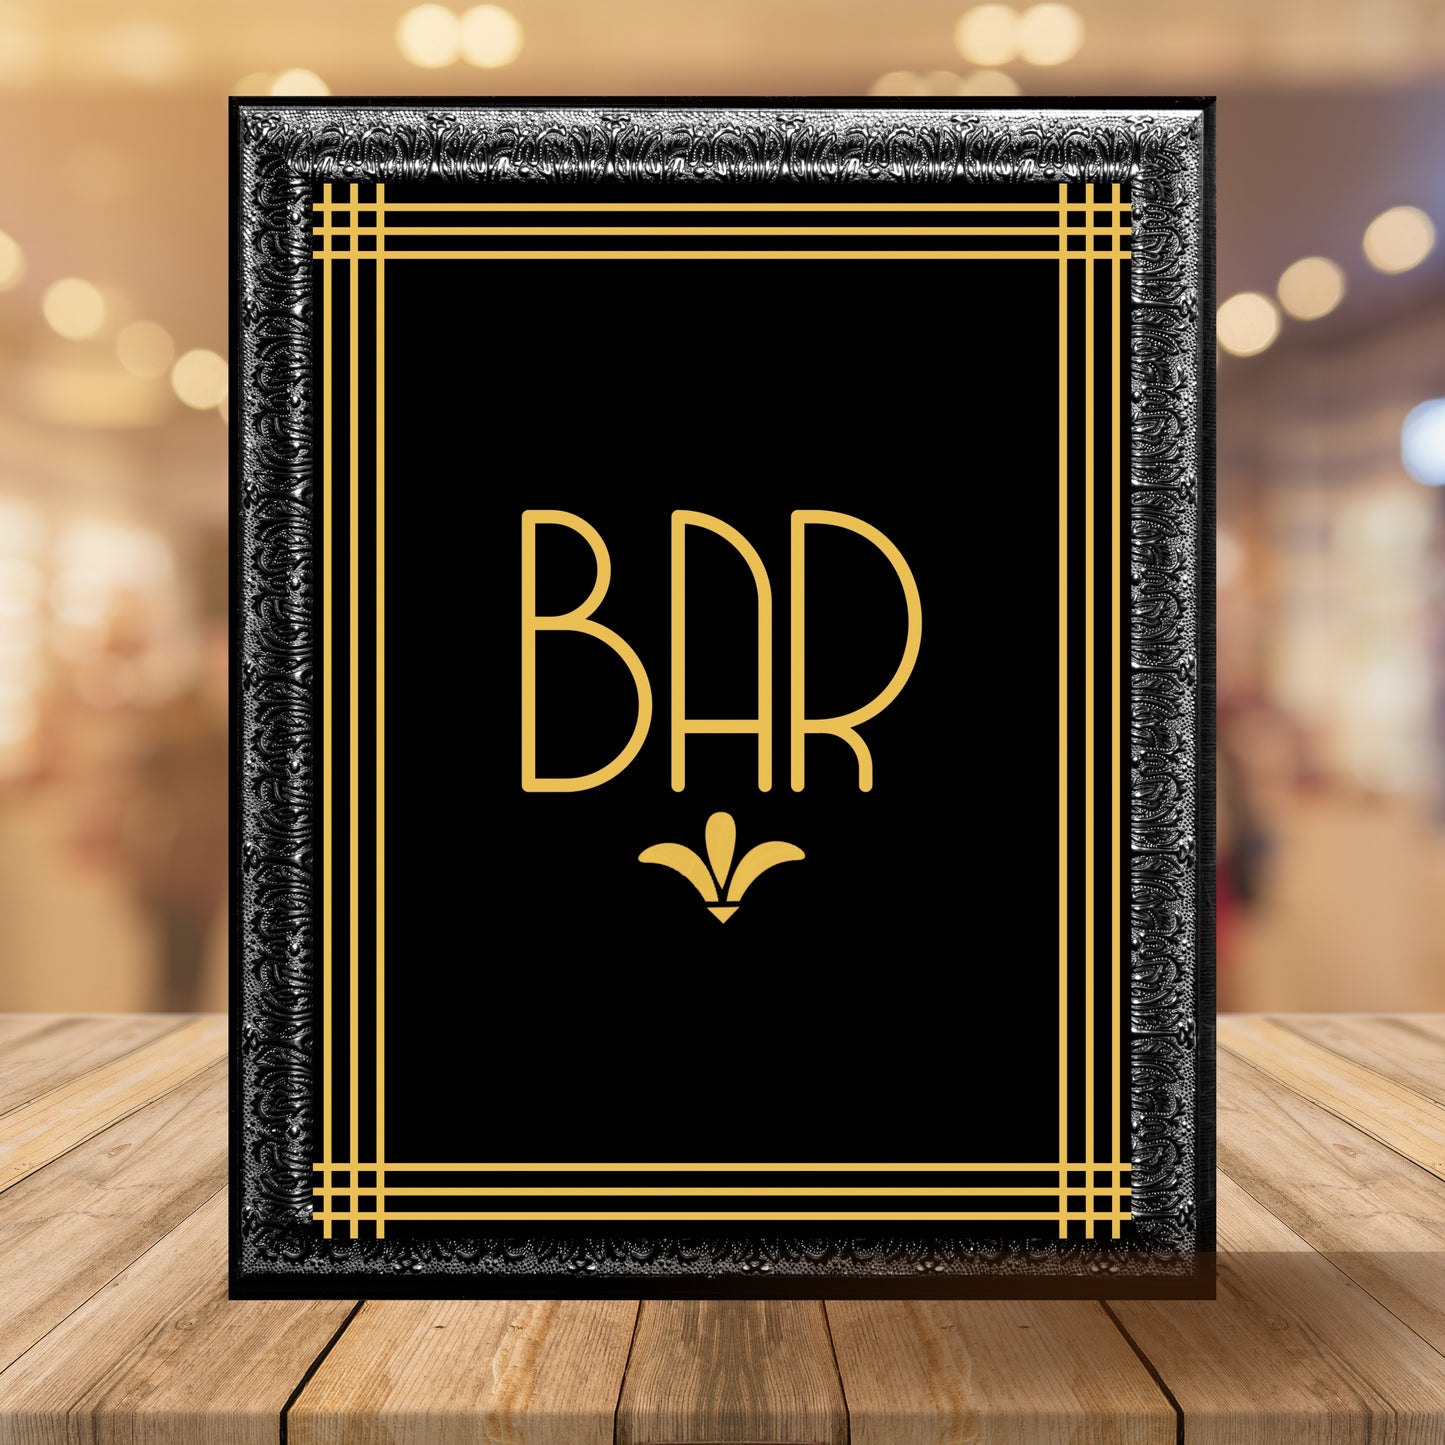 "Bar" Printable Party Sign For Great Gatsby Or Roaring 20's Party Or Wedding, Black & Gold, Printable Party Decor